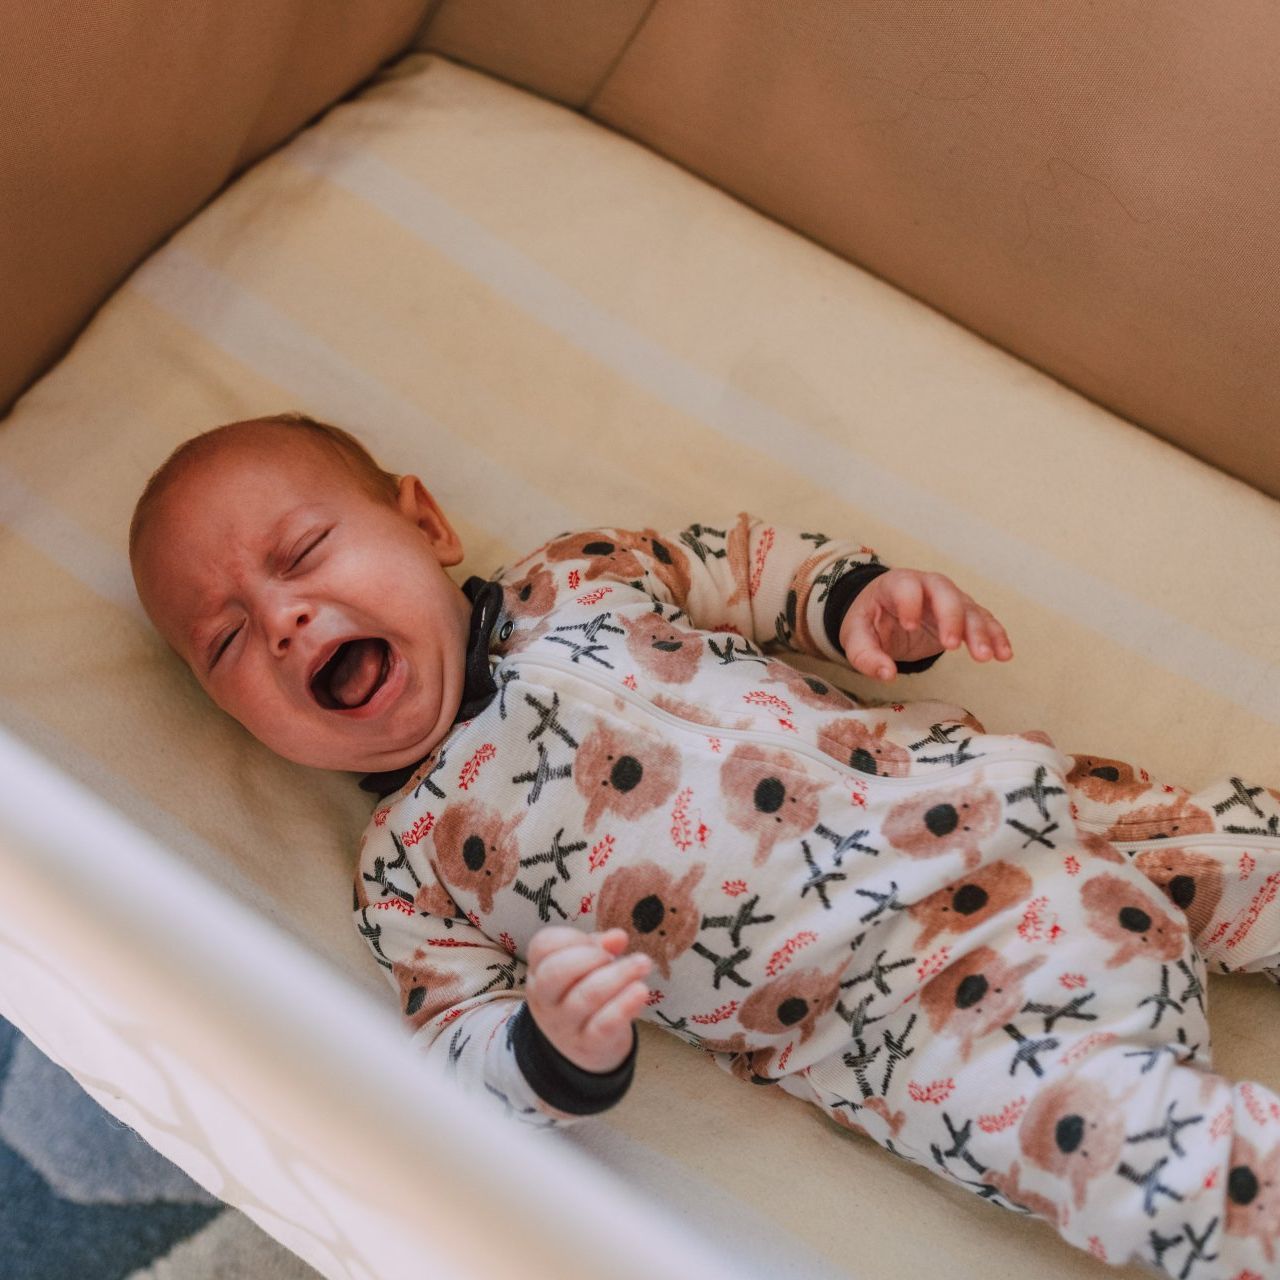 Image of infant crying alone in crib